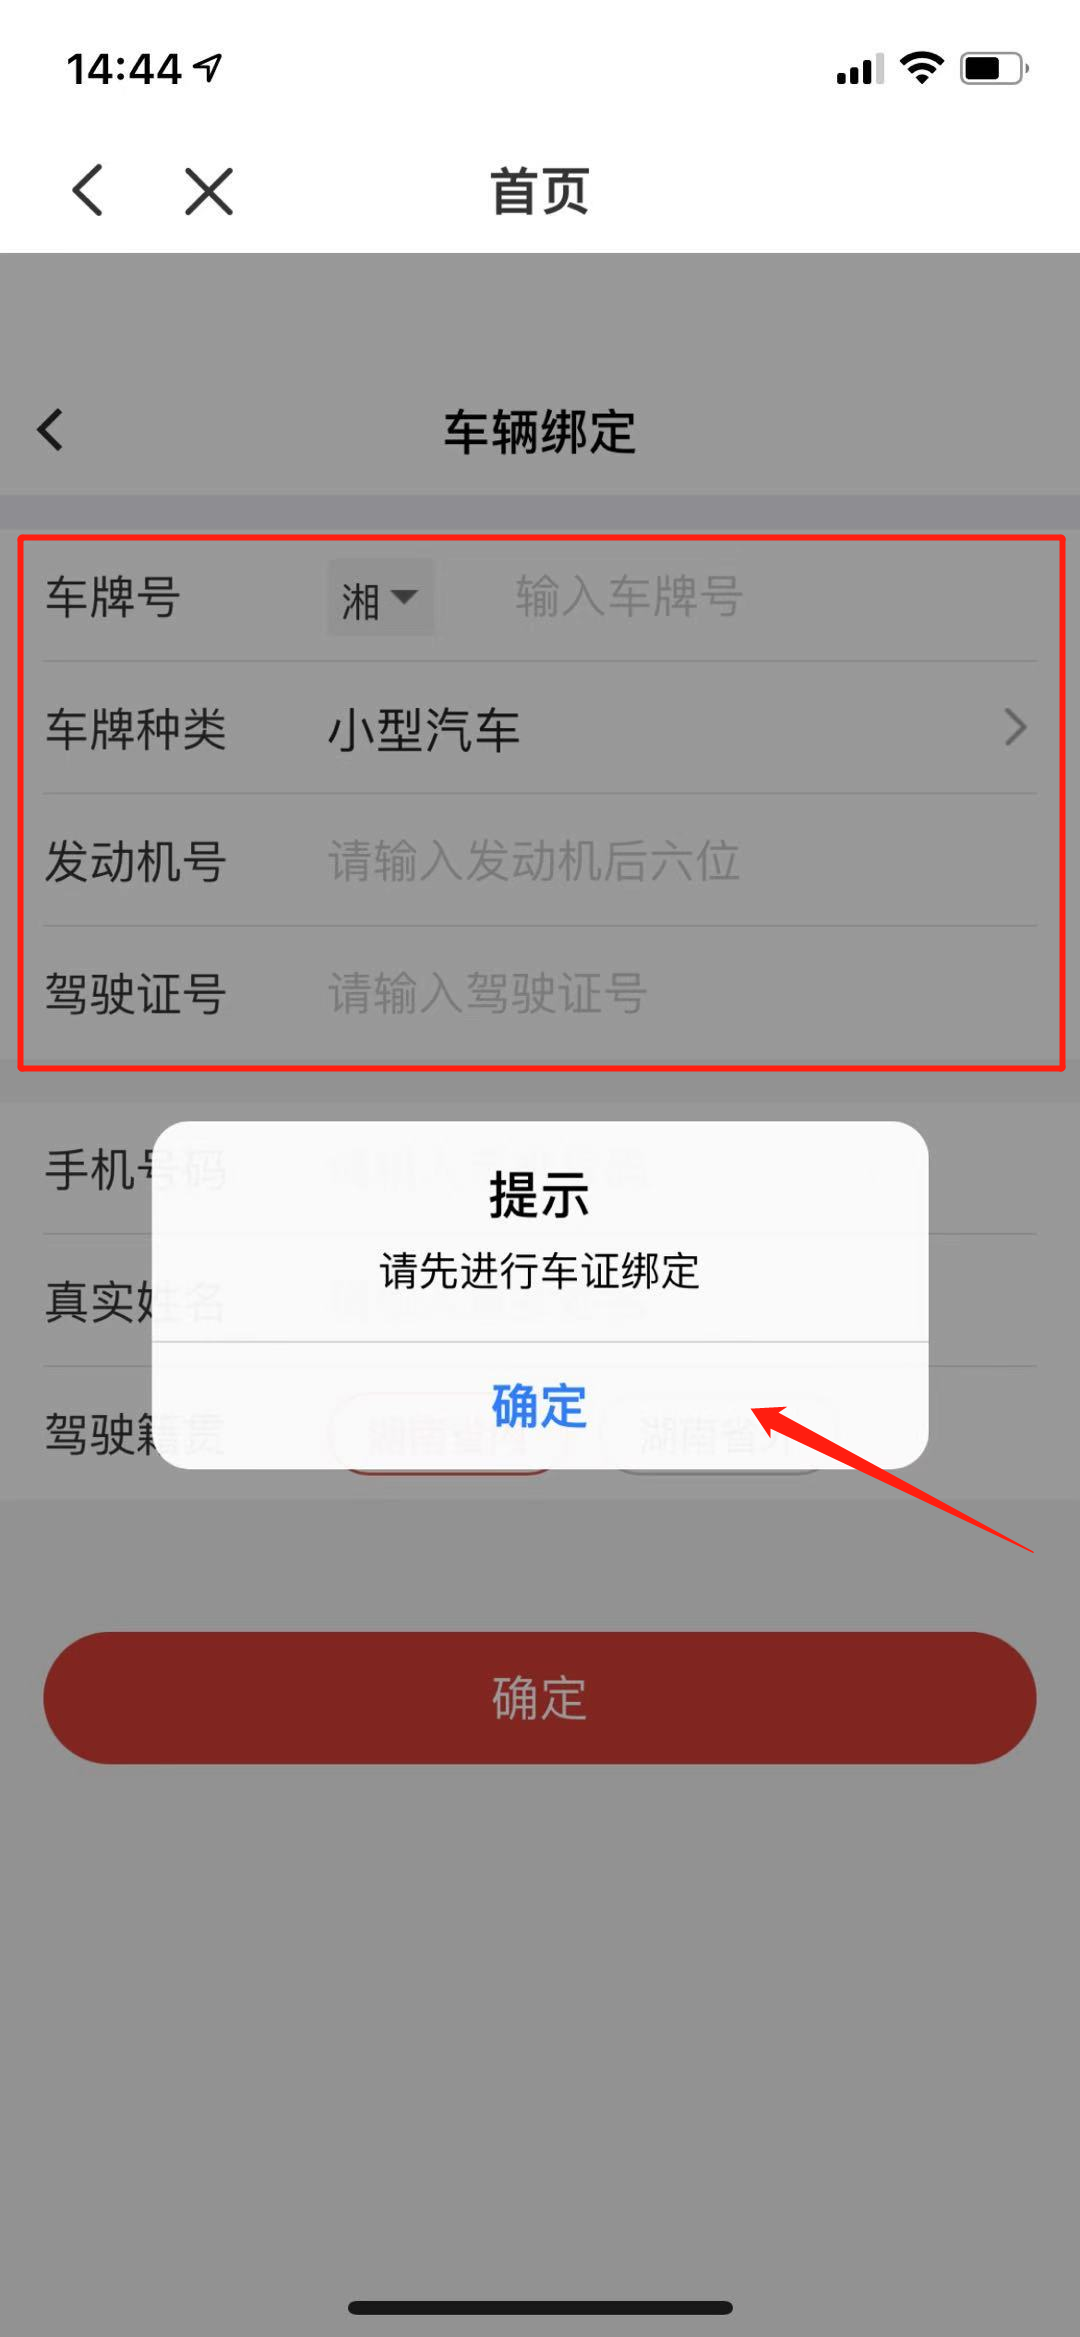 How to check where etc is issued（如何查询etc是在哪里发行的）